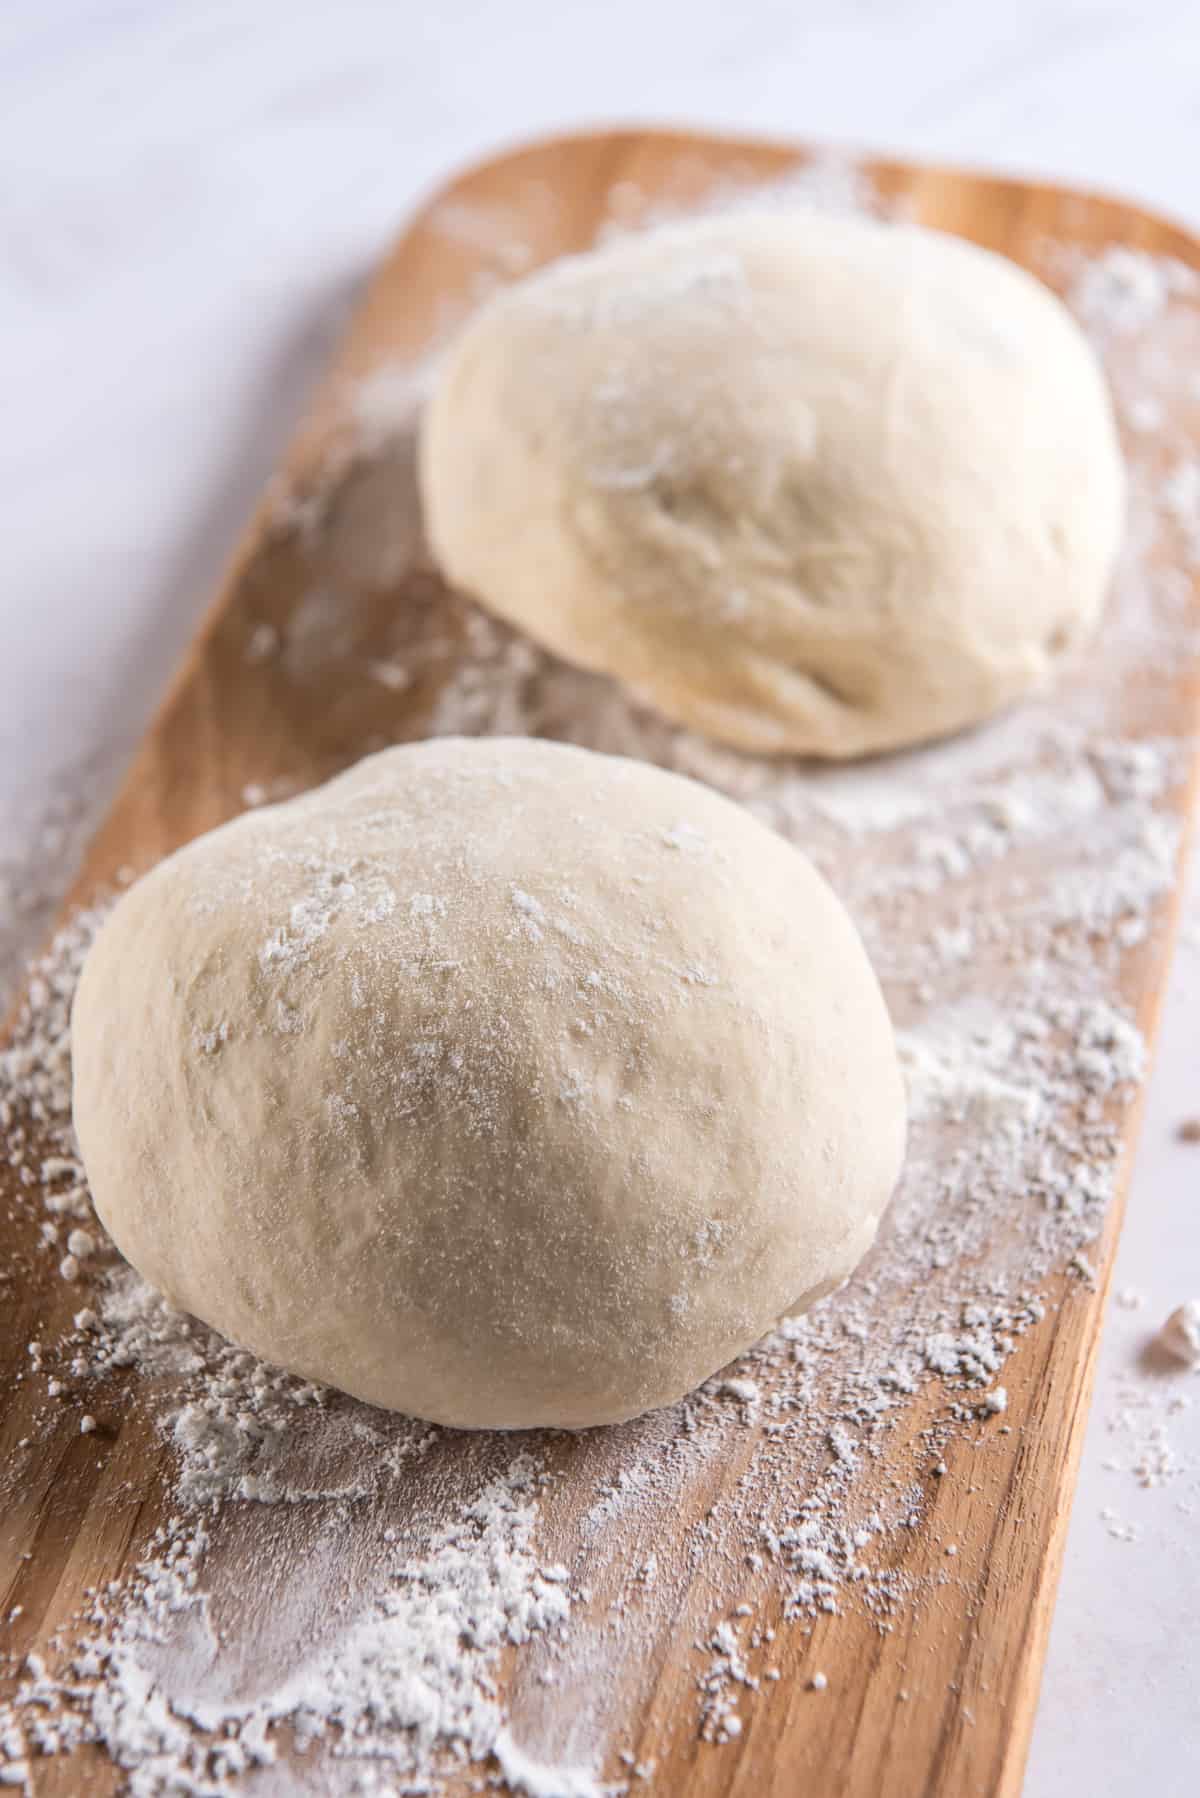 Two balls of pizza dough on a floured board shot from the side.